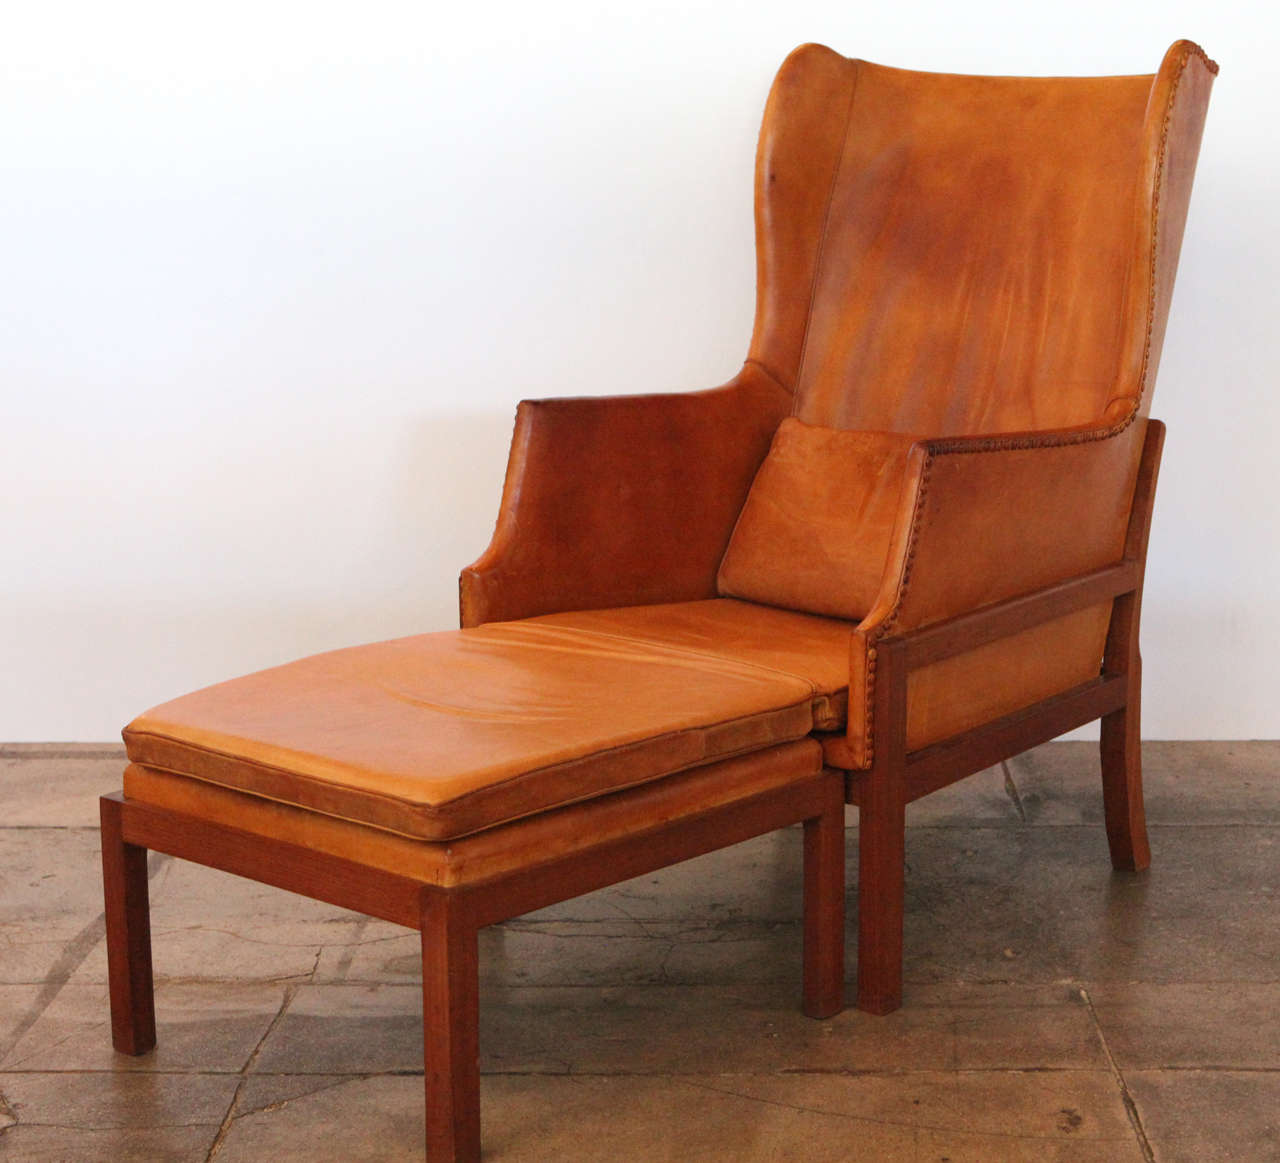 mogens koch most sought after design , his modern take on a classic wingback. connected into one piece or separated into two , this is one of our favorite pieces of scandinavian designs.